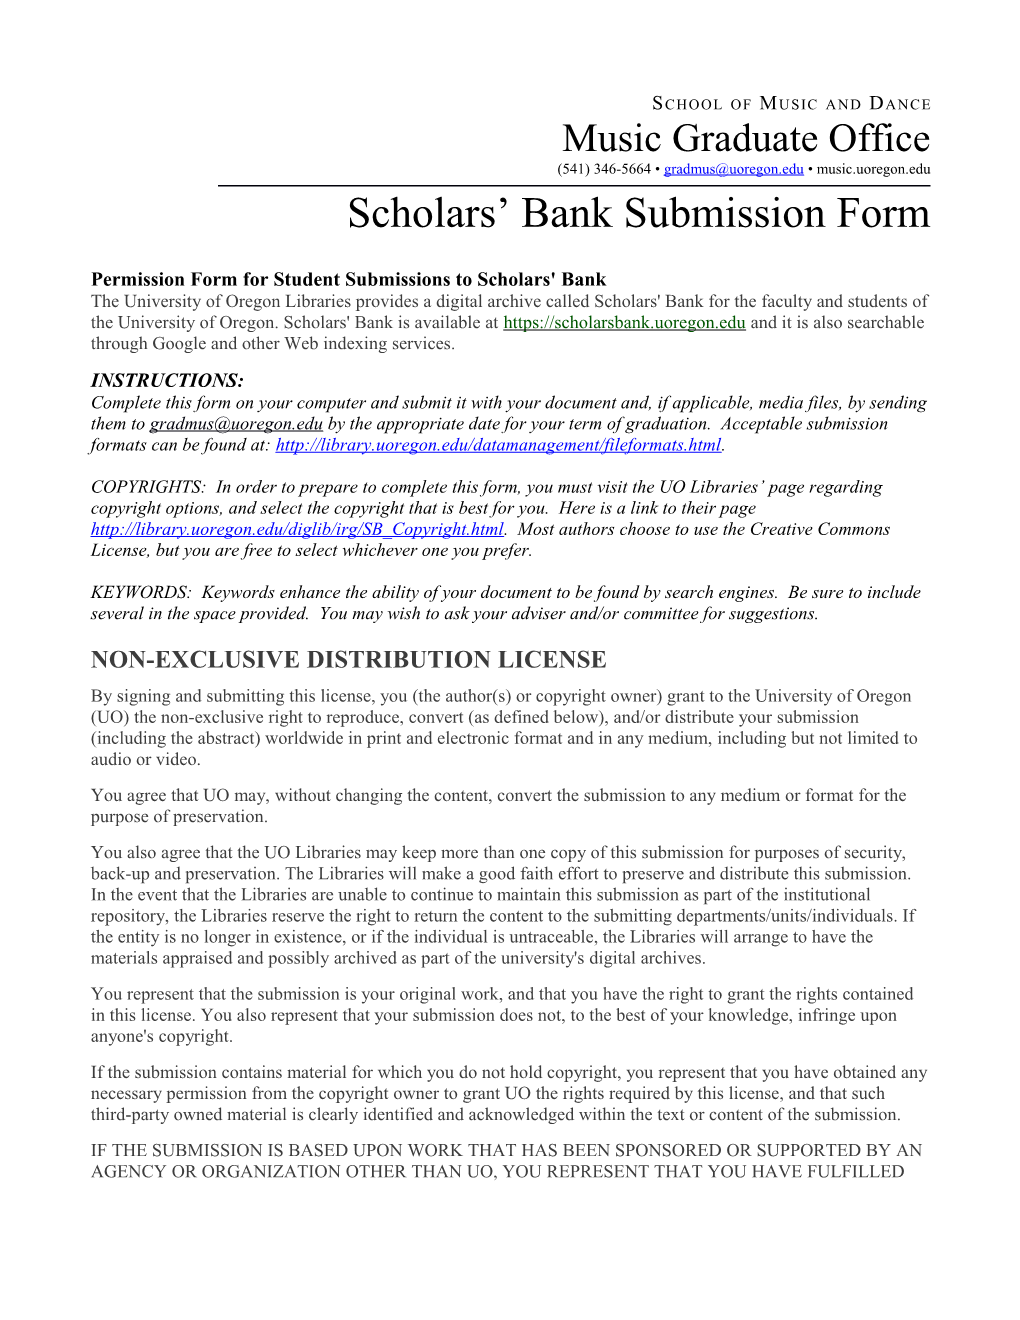 Permission Form for Student Submissions to Scholars' Bank